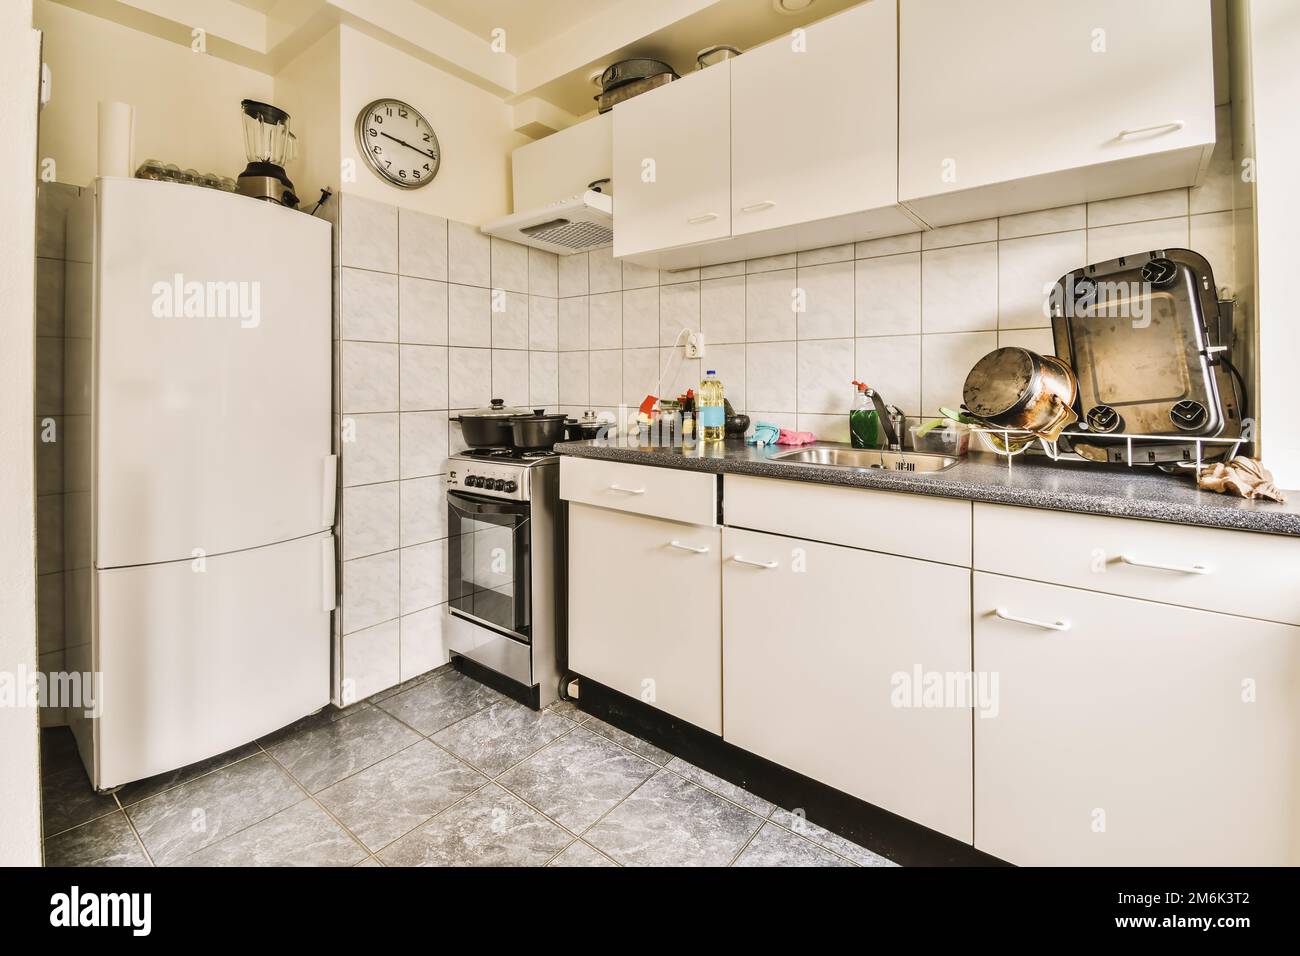 a kitchen with white cupboards and black counter tops on the counters in this photo is taken from the inside Stock Photo